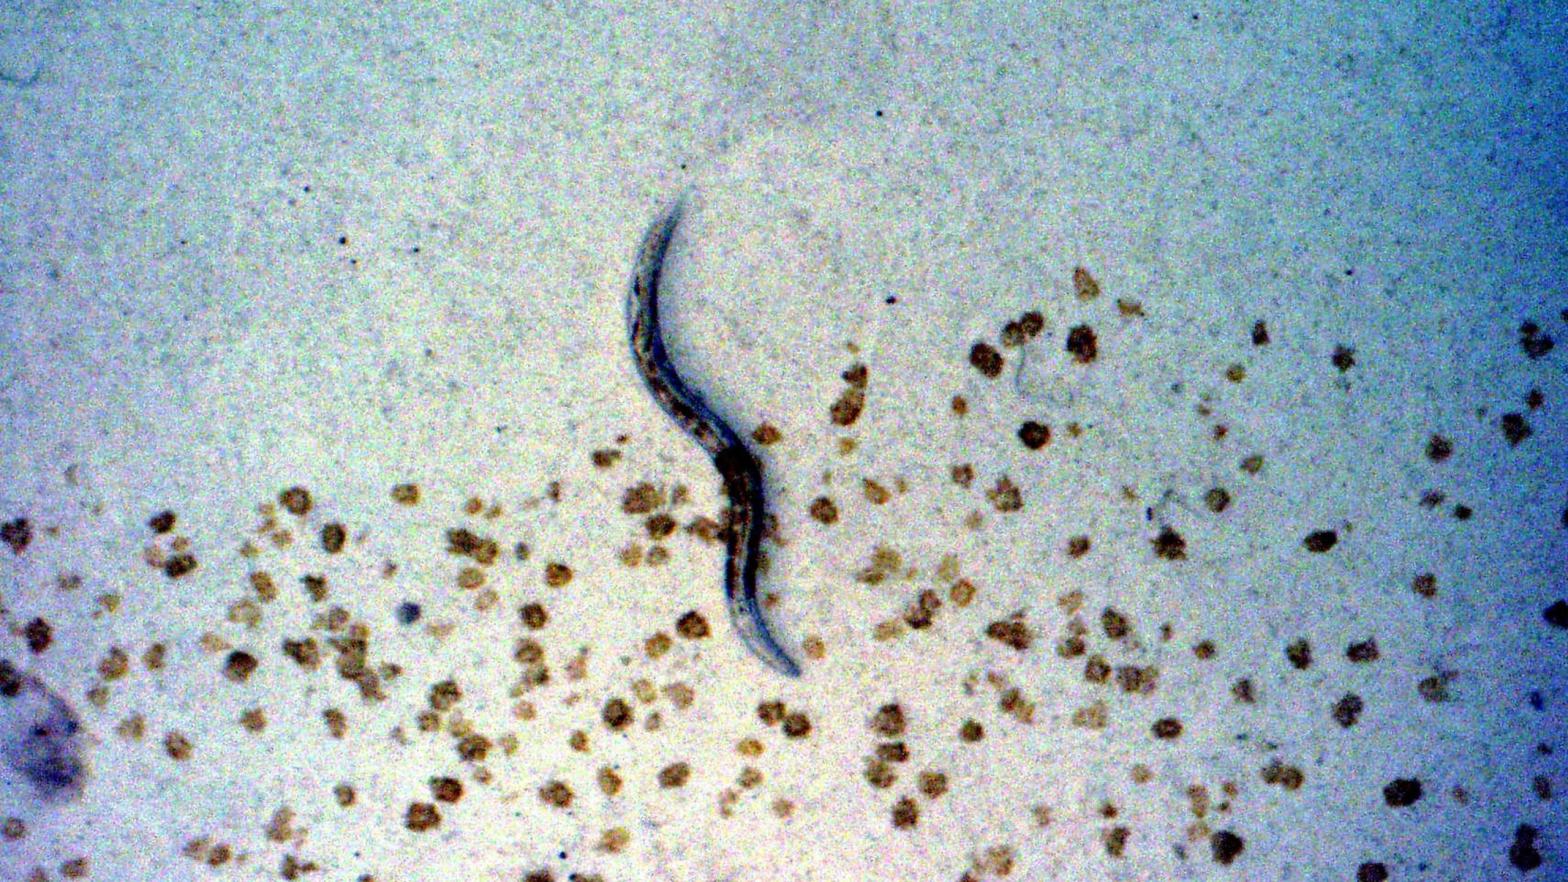 A C. elegans nematode descended from those aboard the space shuttle Columbia in 2003. (Photo: Volker Kern/NASA/Getty Images, Getty Images)